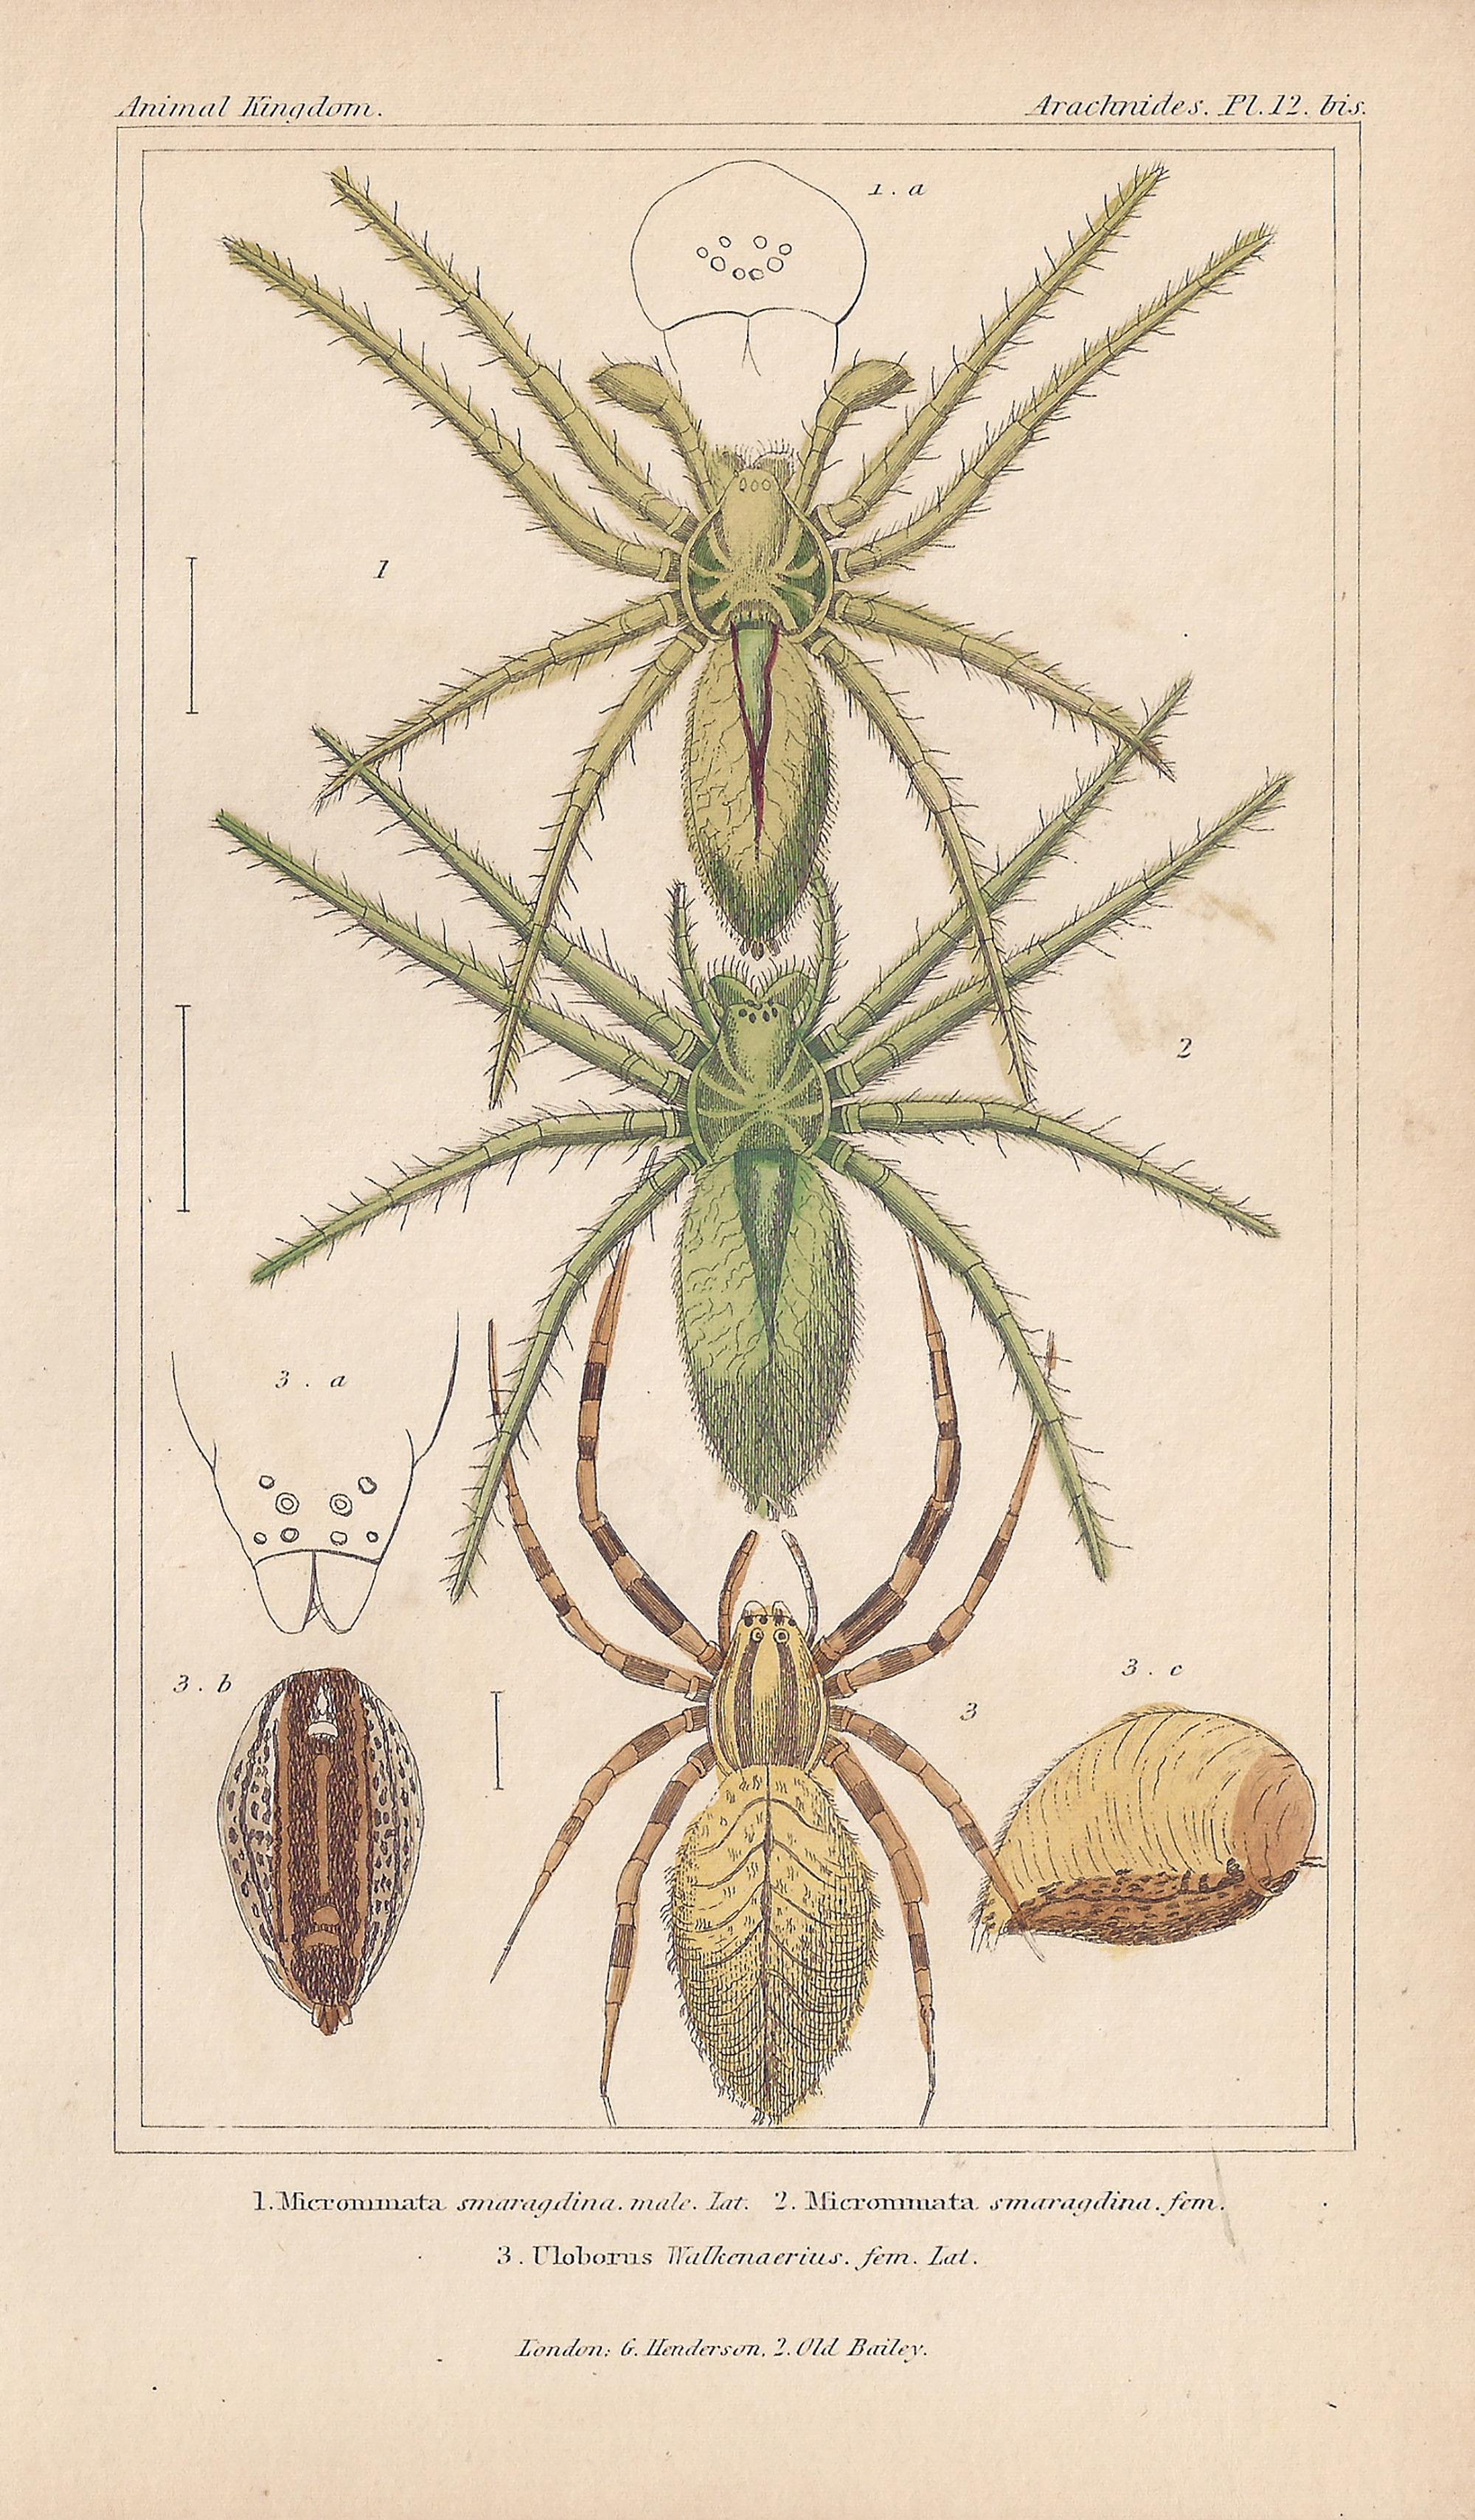 Animal Print Unknown - Spiders, anciennes gravures anglaises d'histoire naturelle, 1837